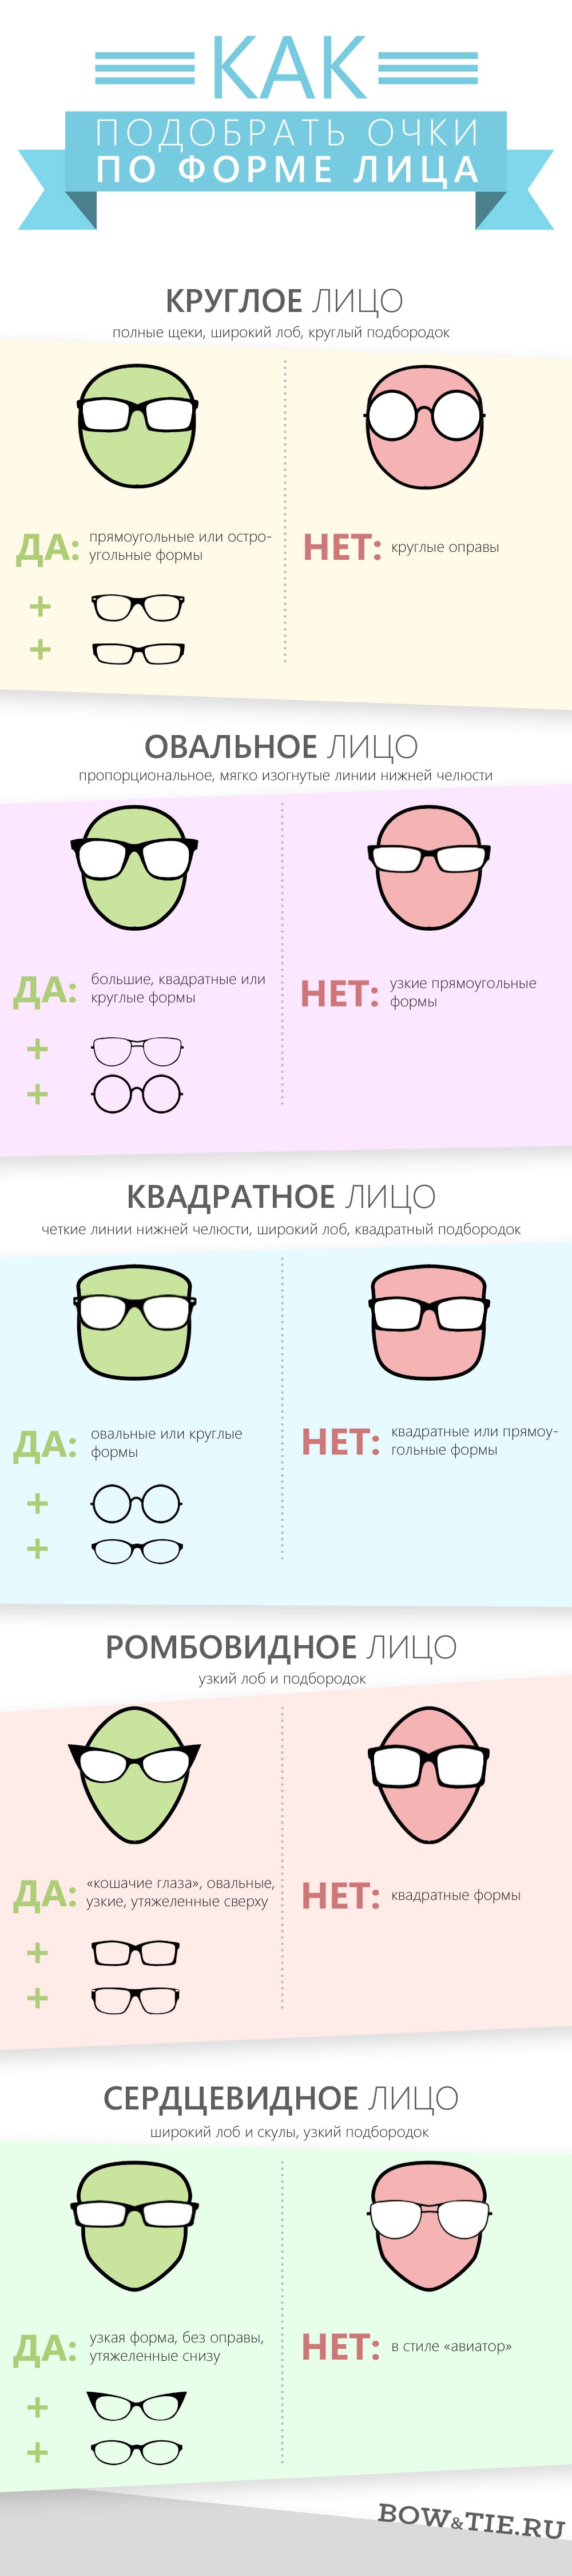 How to choose glasses for a man (infographic) 